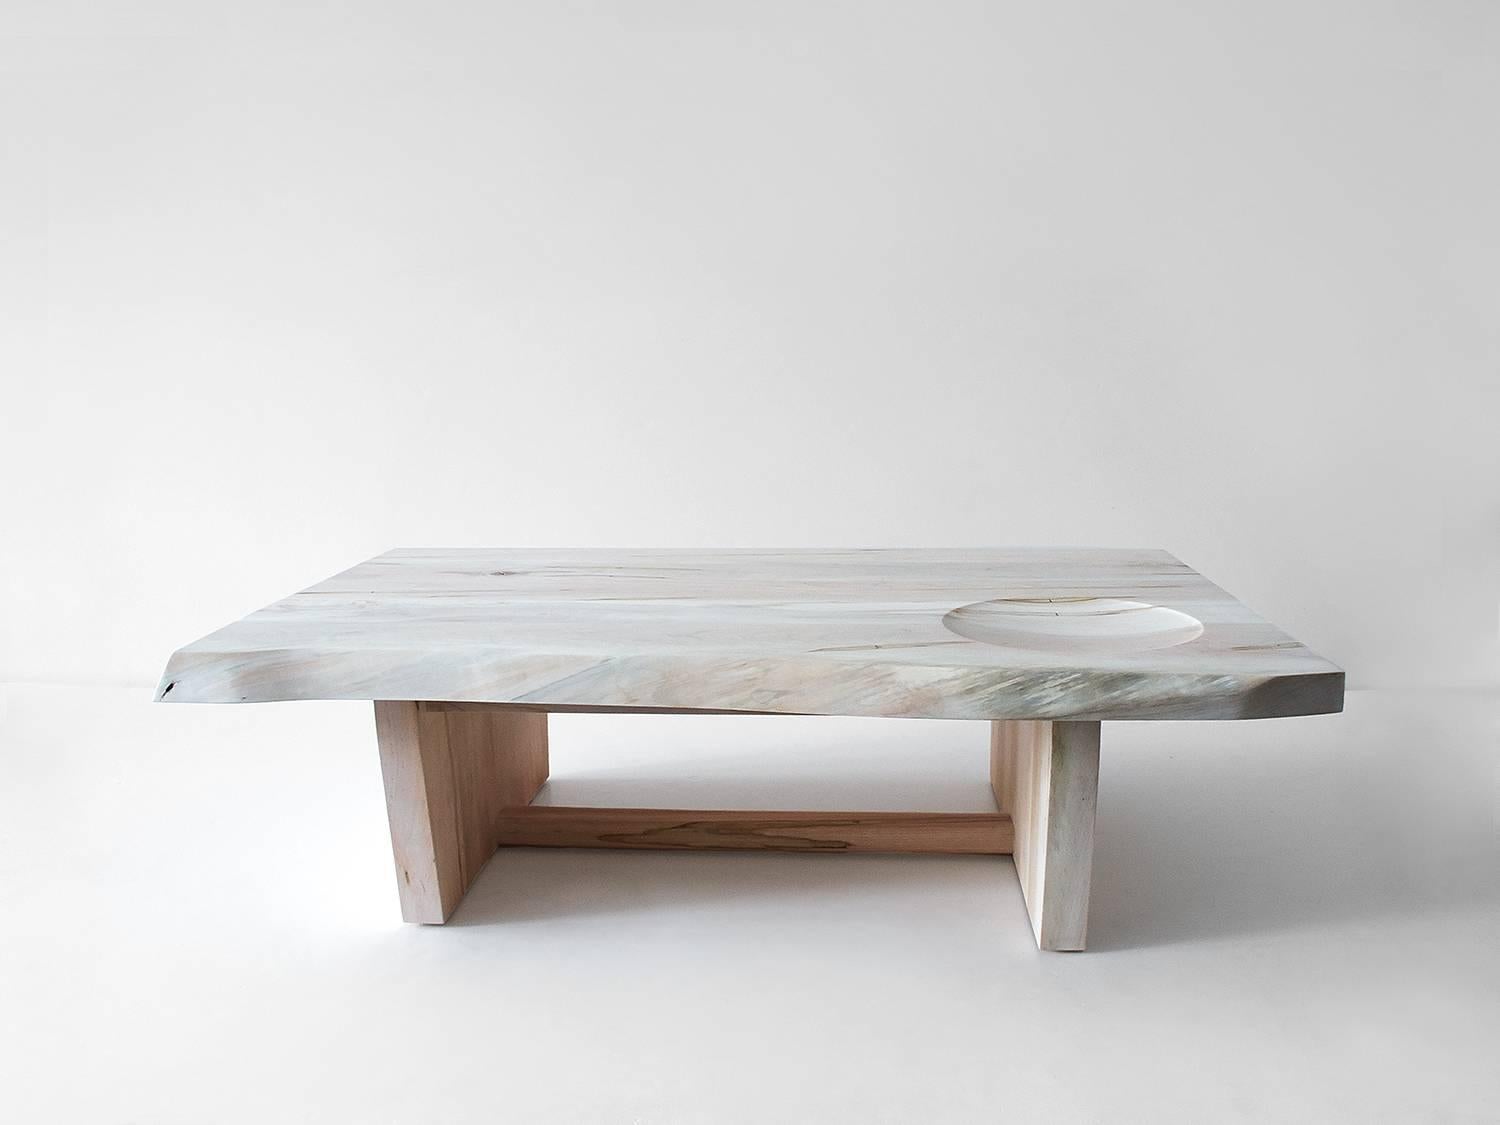 The maple slab low table features a patchwork or single slab top with a sled base. Available in oxidized, bleached or natural maple. Dimensions vary by single slab. Custom sizing available for multiple board slabs. Brass joinery available.

Shown